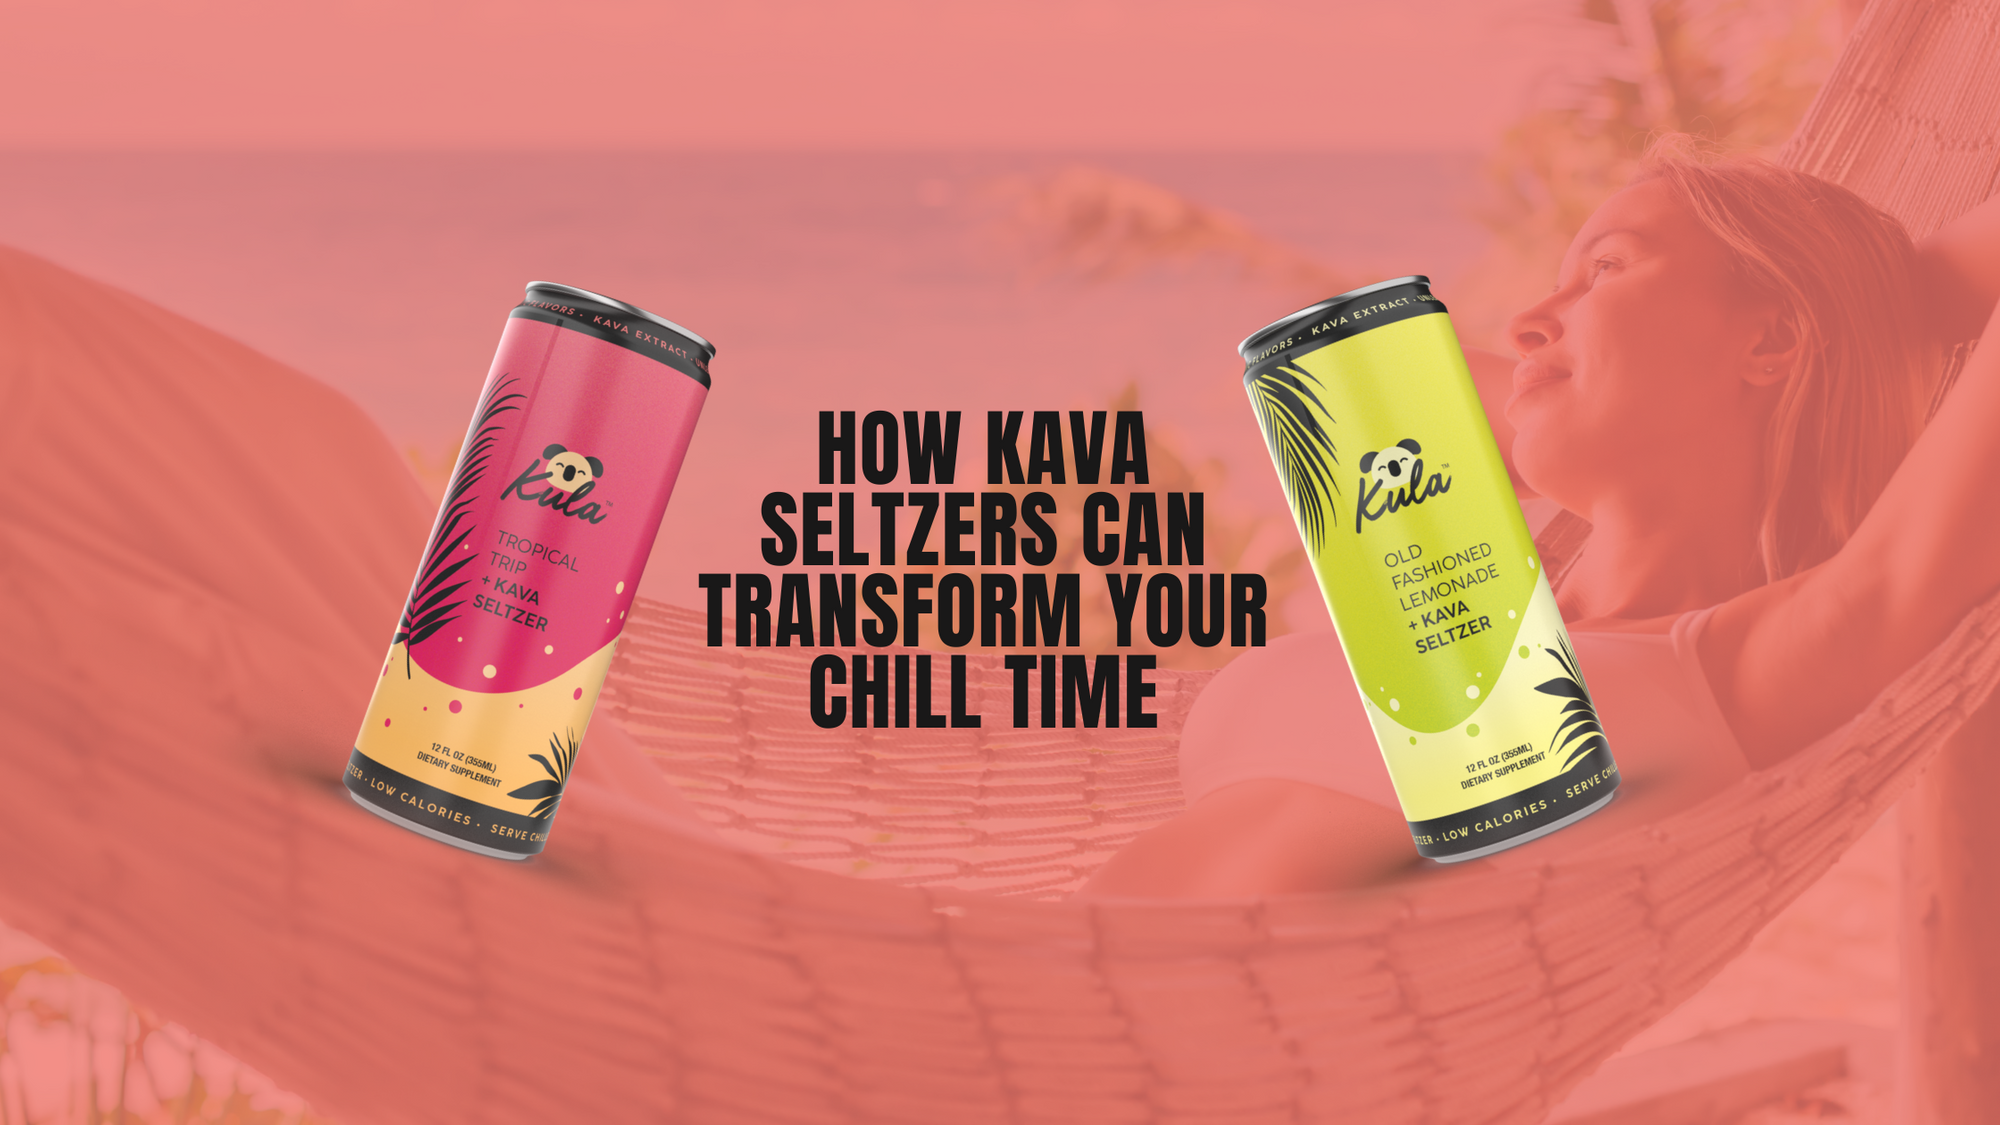 How Kava Seltzers Can Transform Your Chill Time